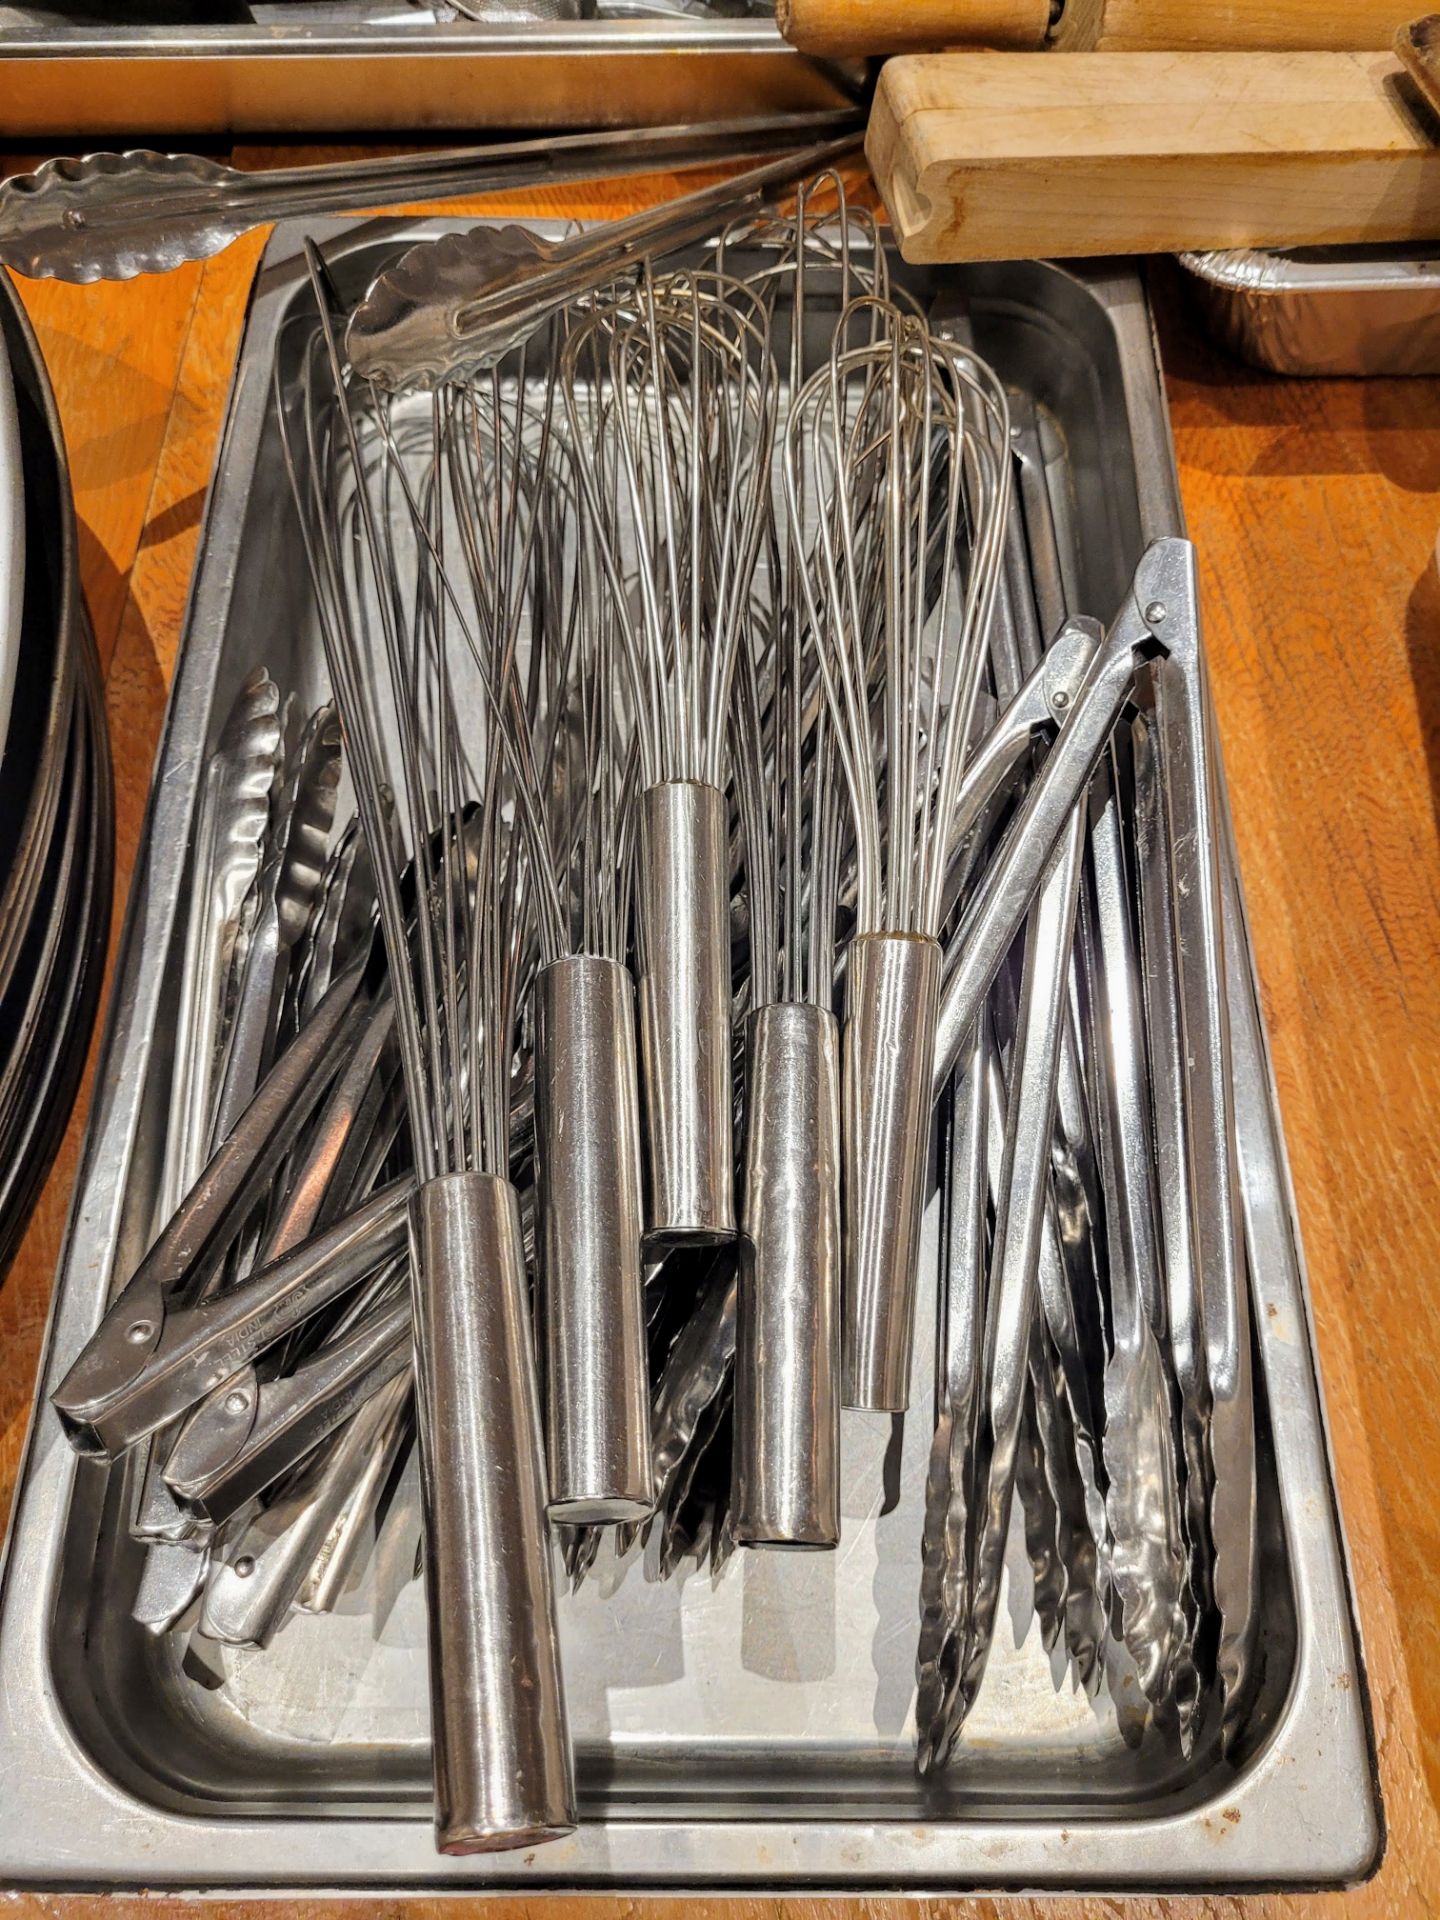 LOT - LARGE ASSORTMENT OF KITCHEN UNTENSILS: LADELS, TONGS, WHISKS, ROLLING PINS, WOODEN SPOONS, - Image 3 of 15